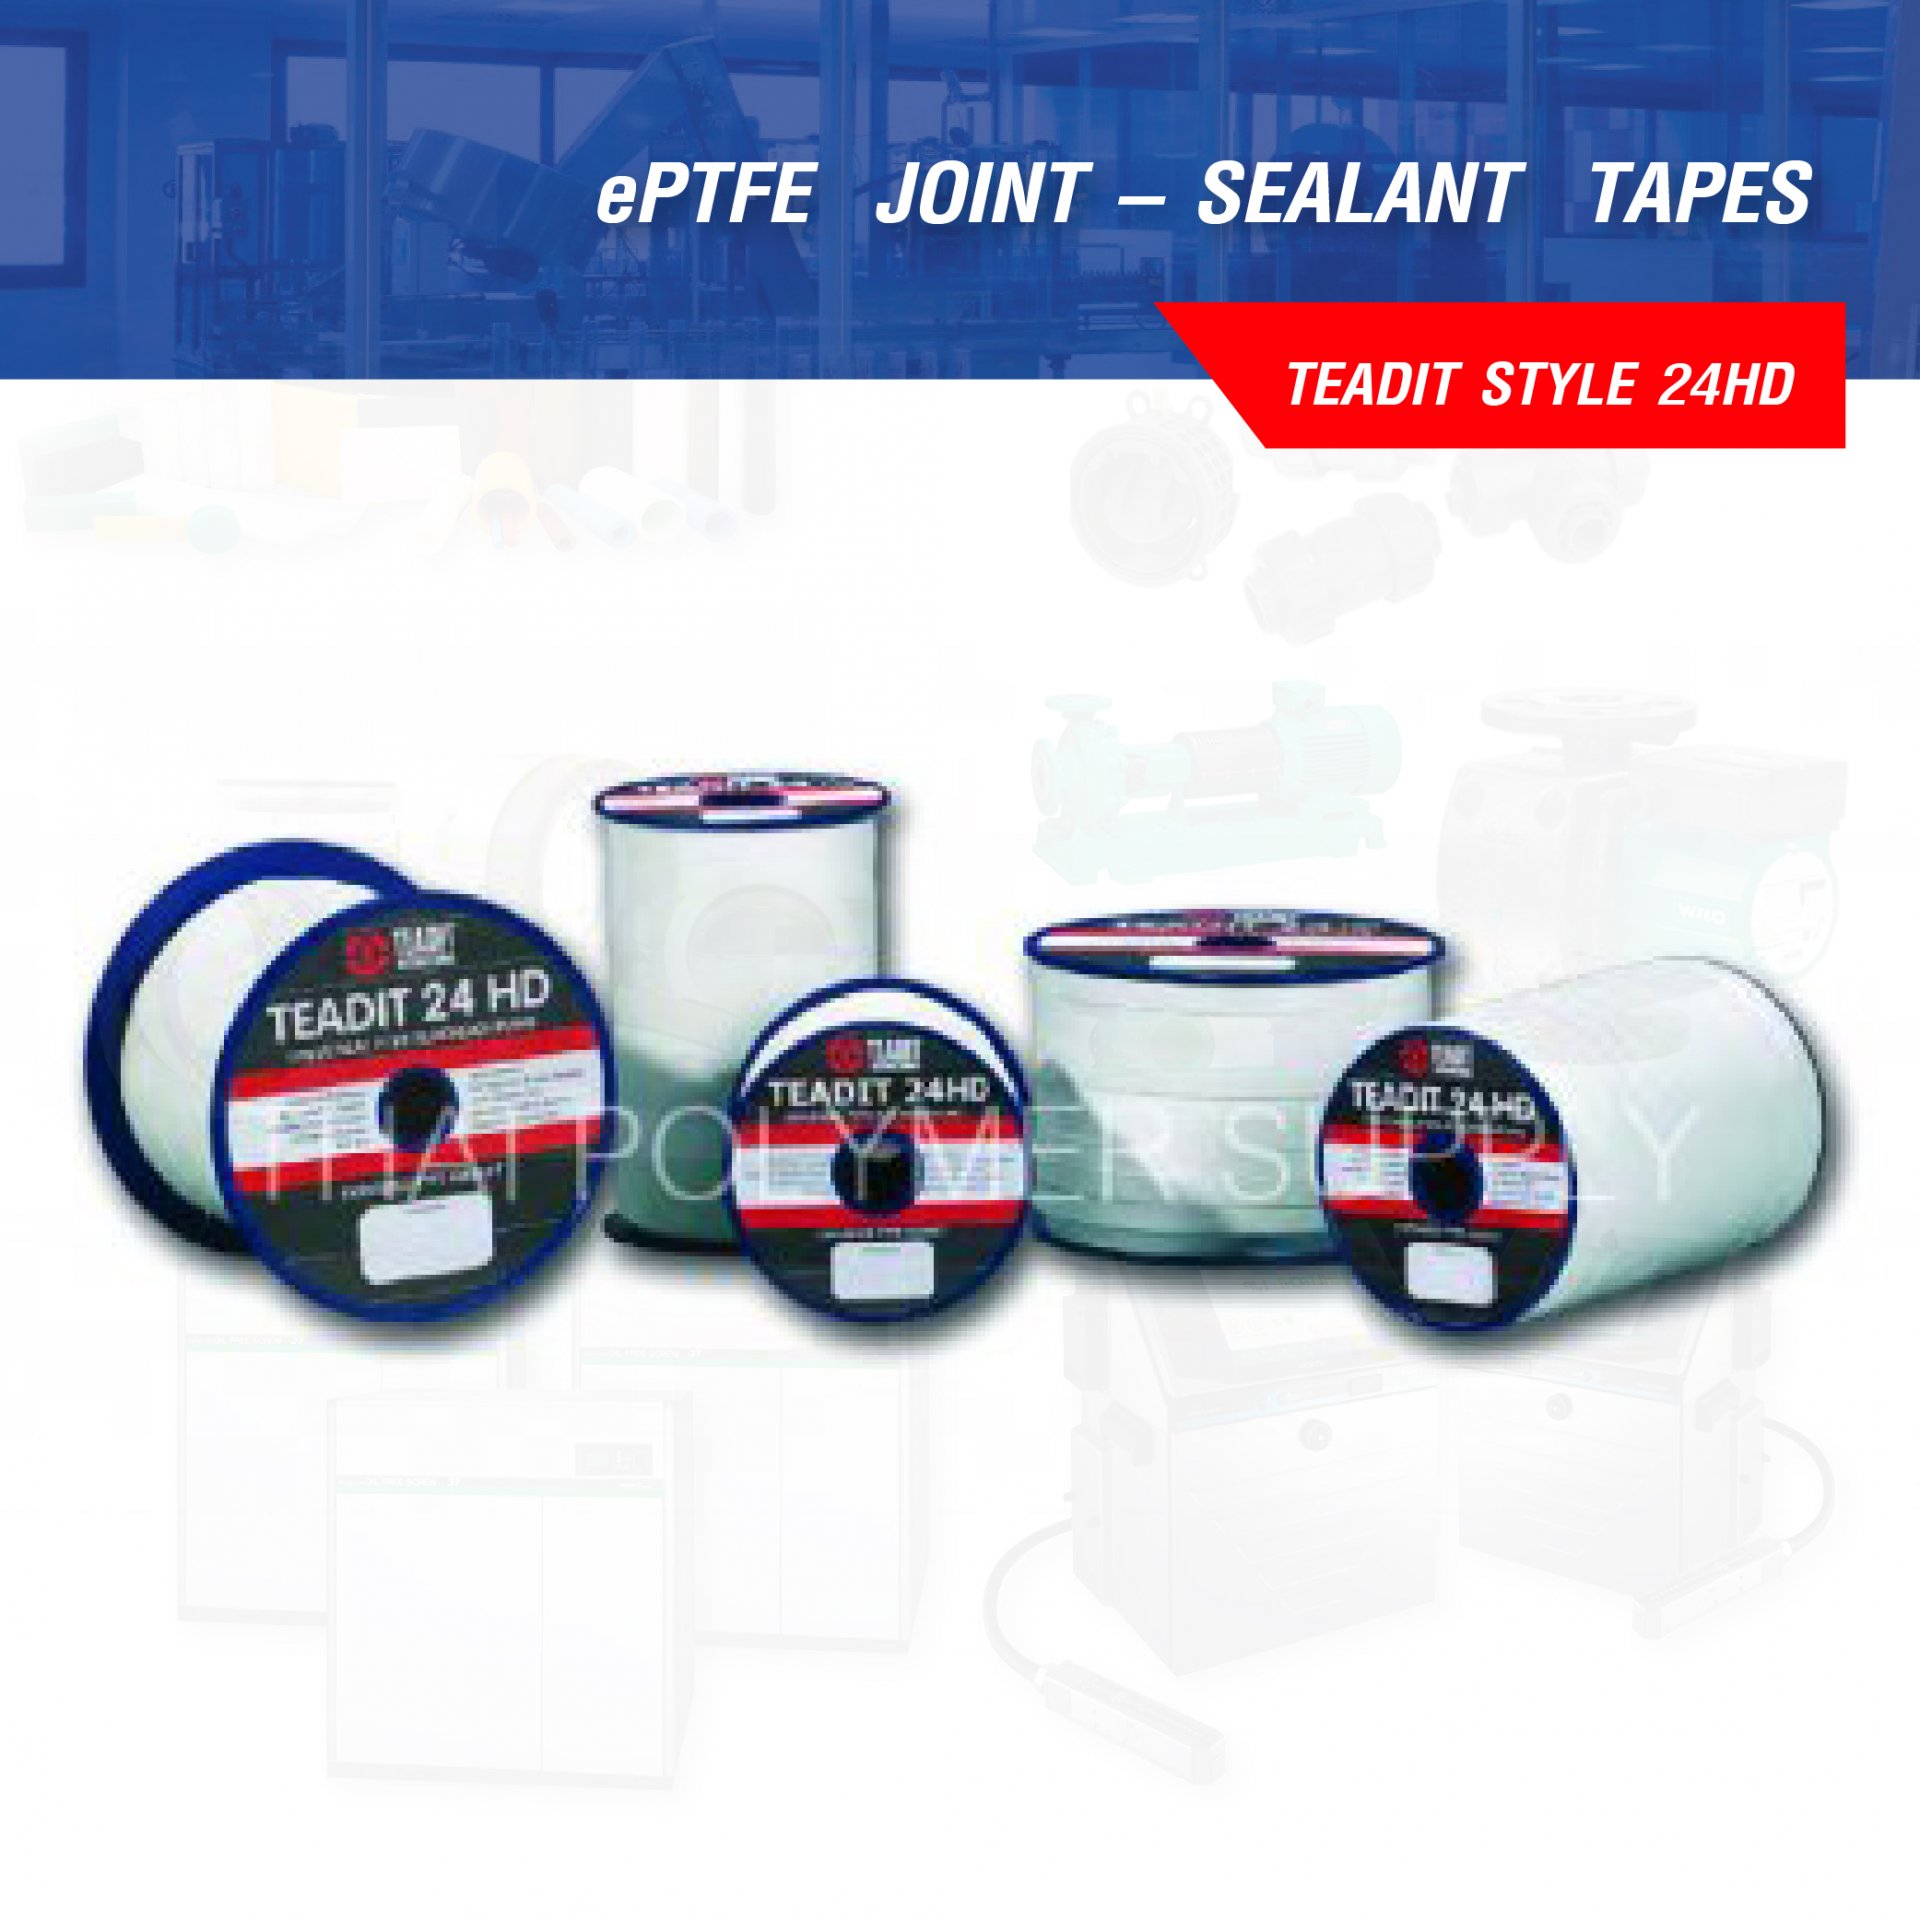 ePTFE  JOINT – SEALANT  TAPES ปะเก็นเส้นเทปเทปล่อน